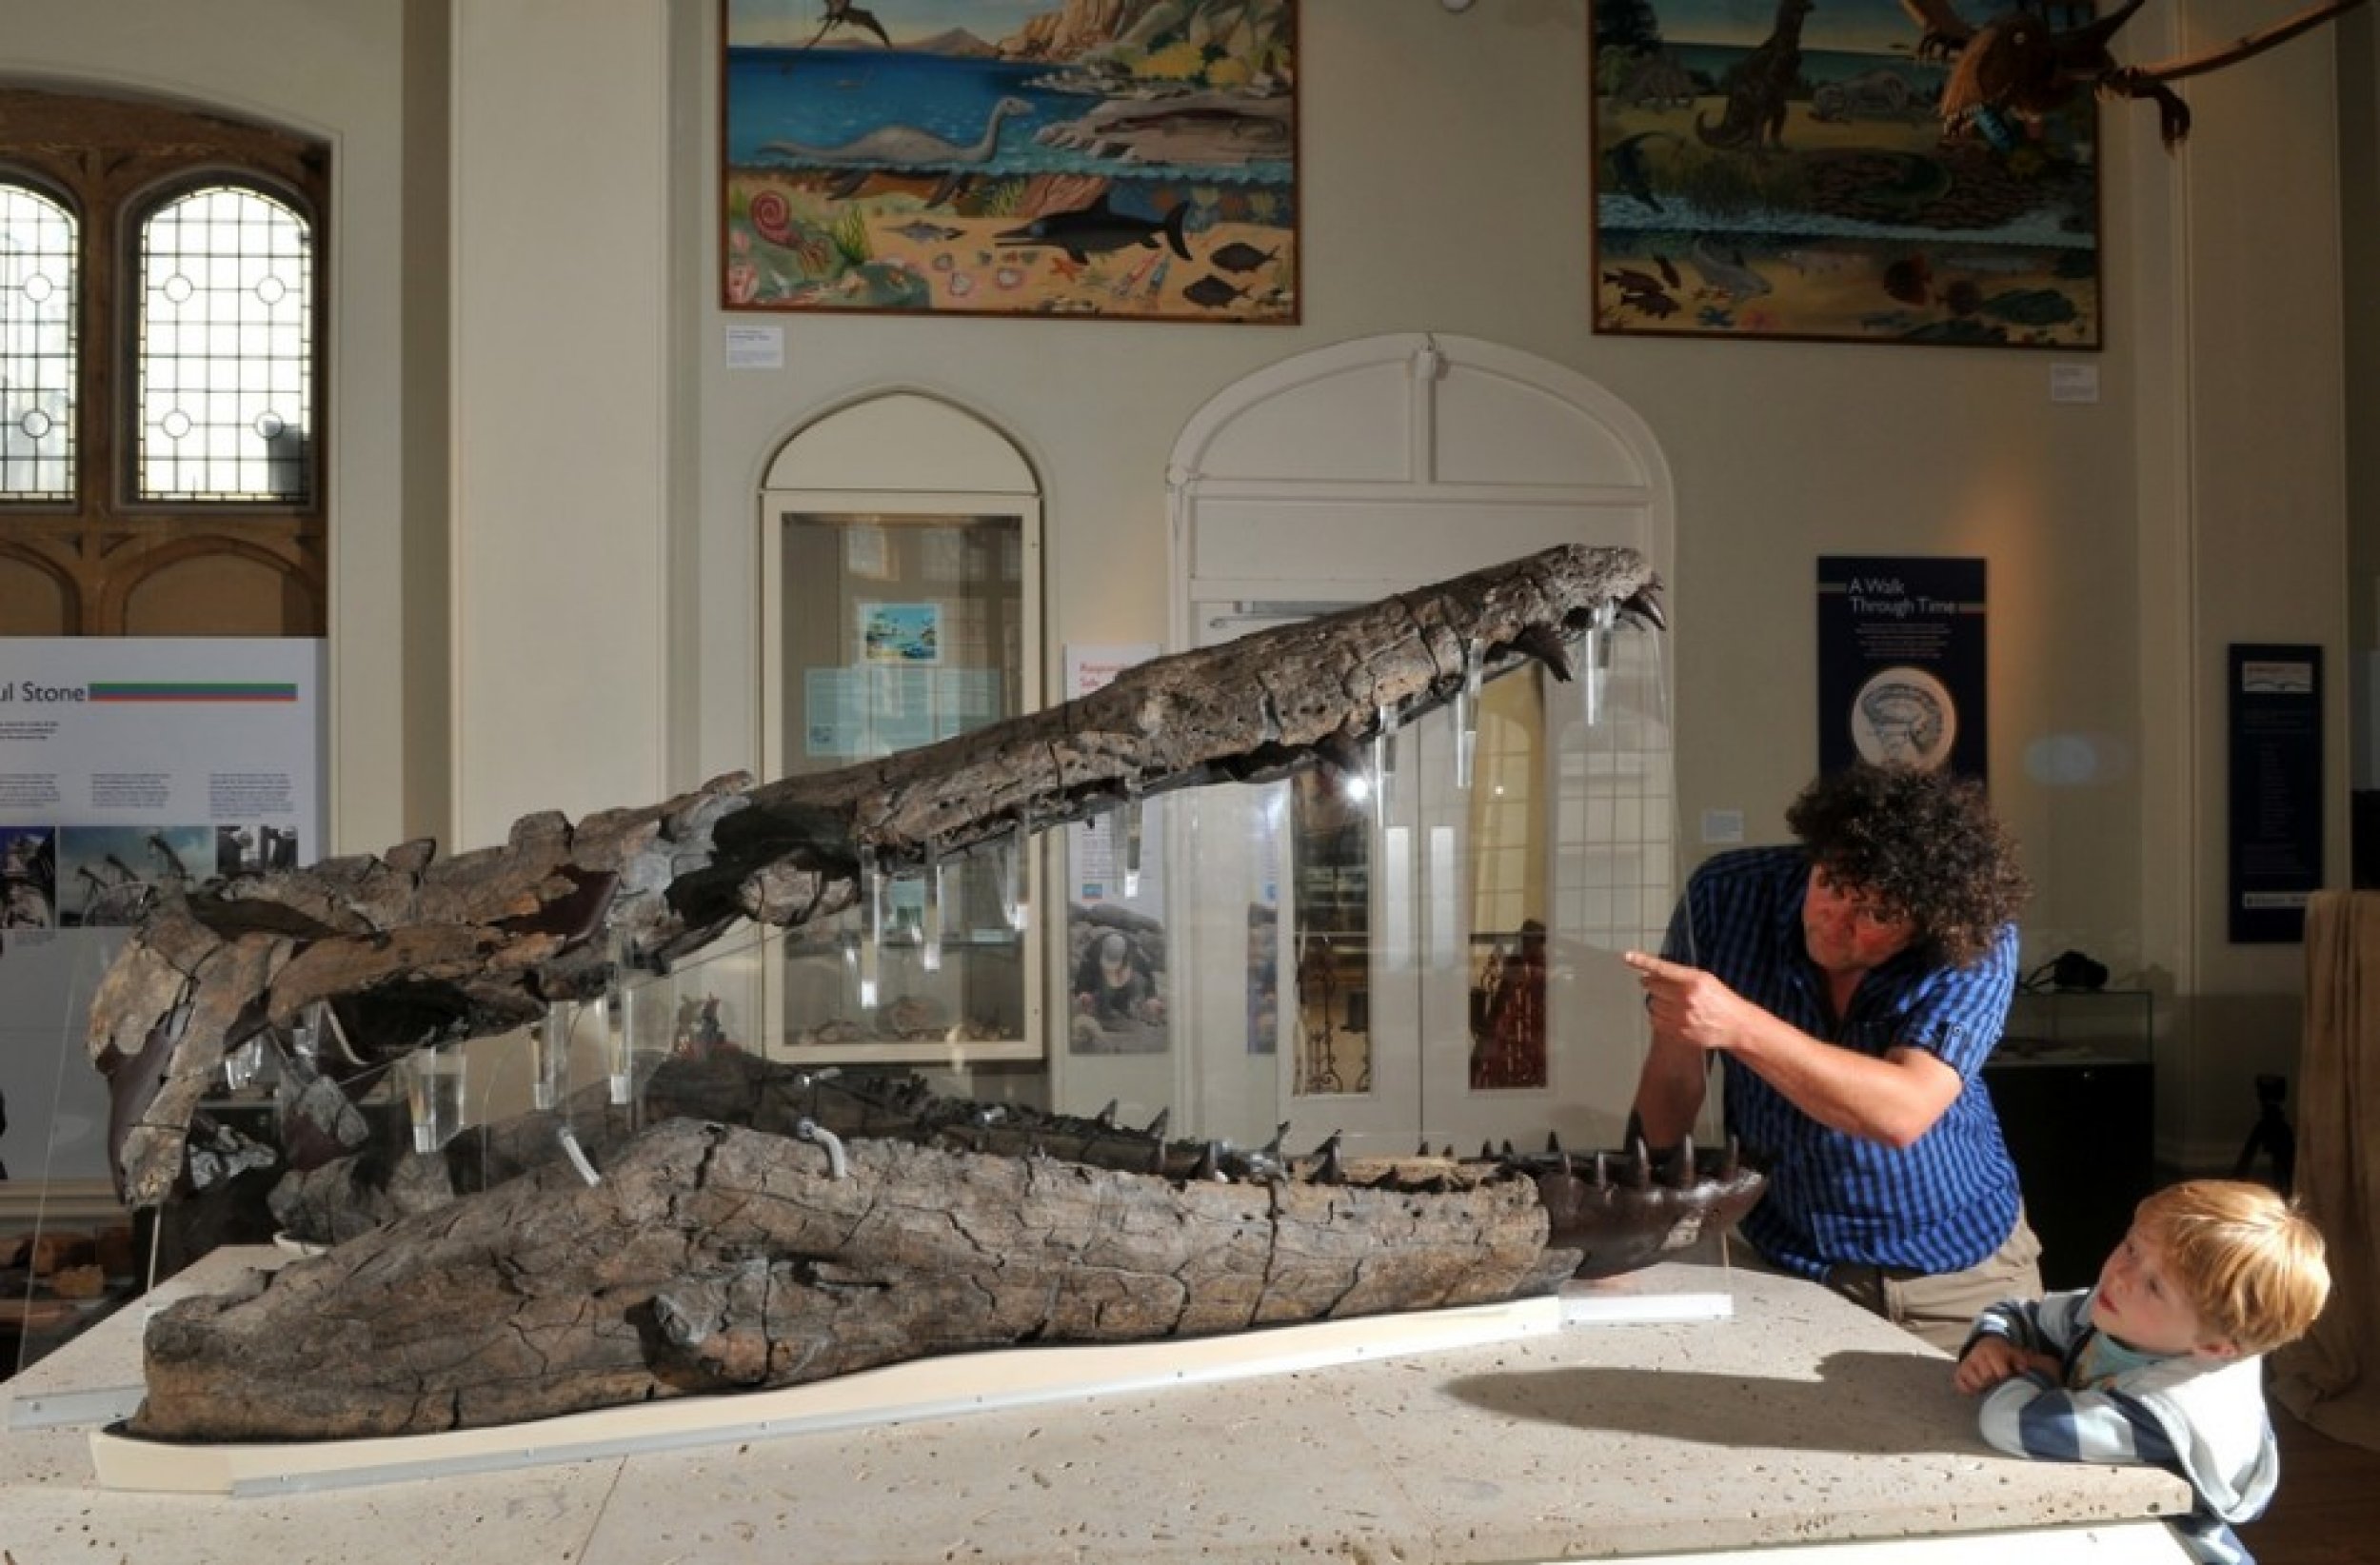 Worlds largest pre-historic Sea Monster skull found.